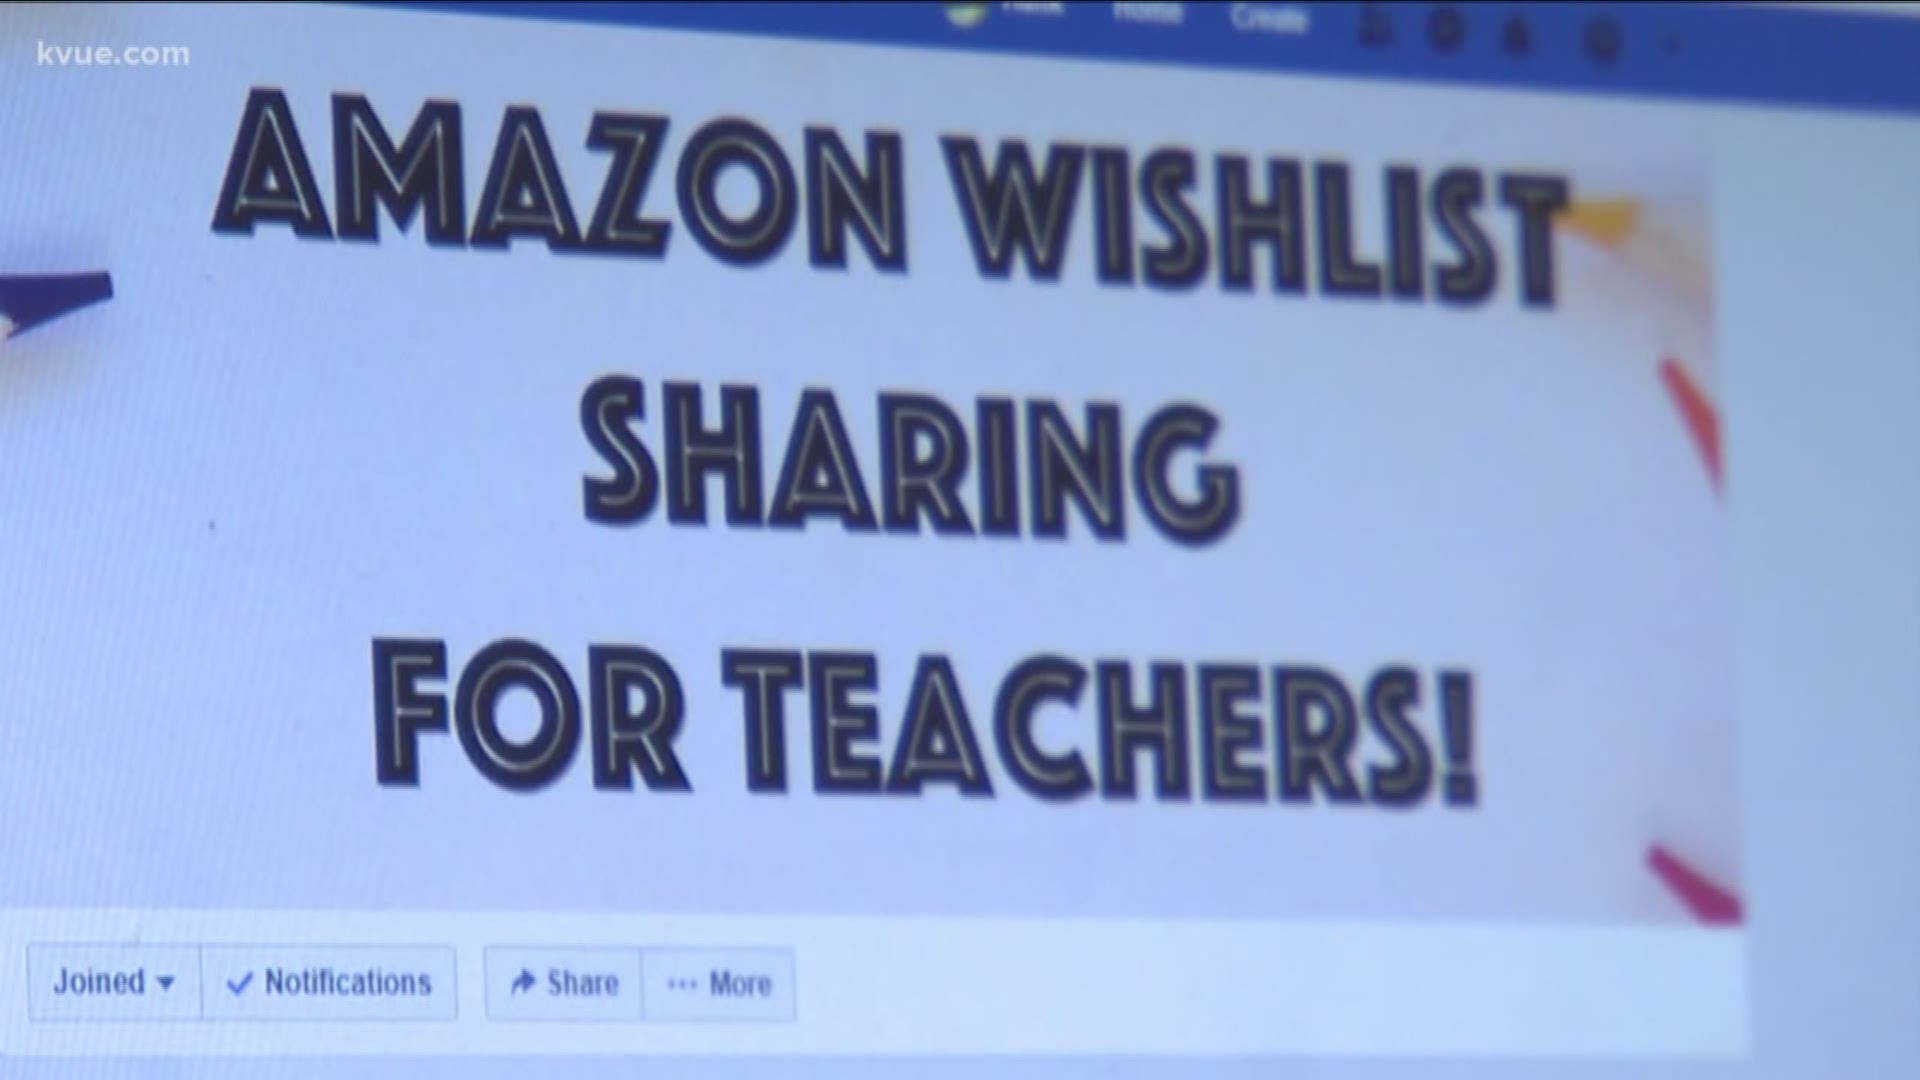 Buying school supplies for the new year can add up. But thanks to social media, some teachers are getting a little help.